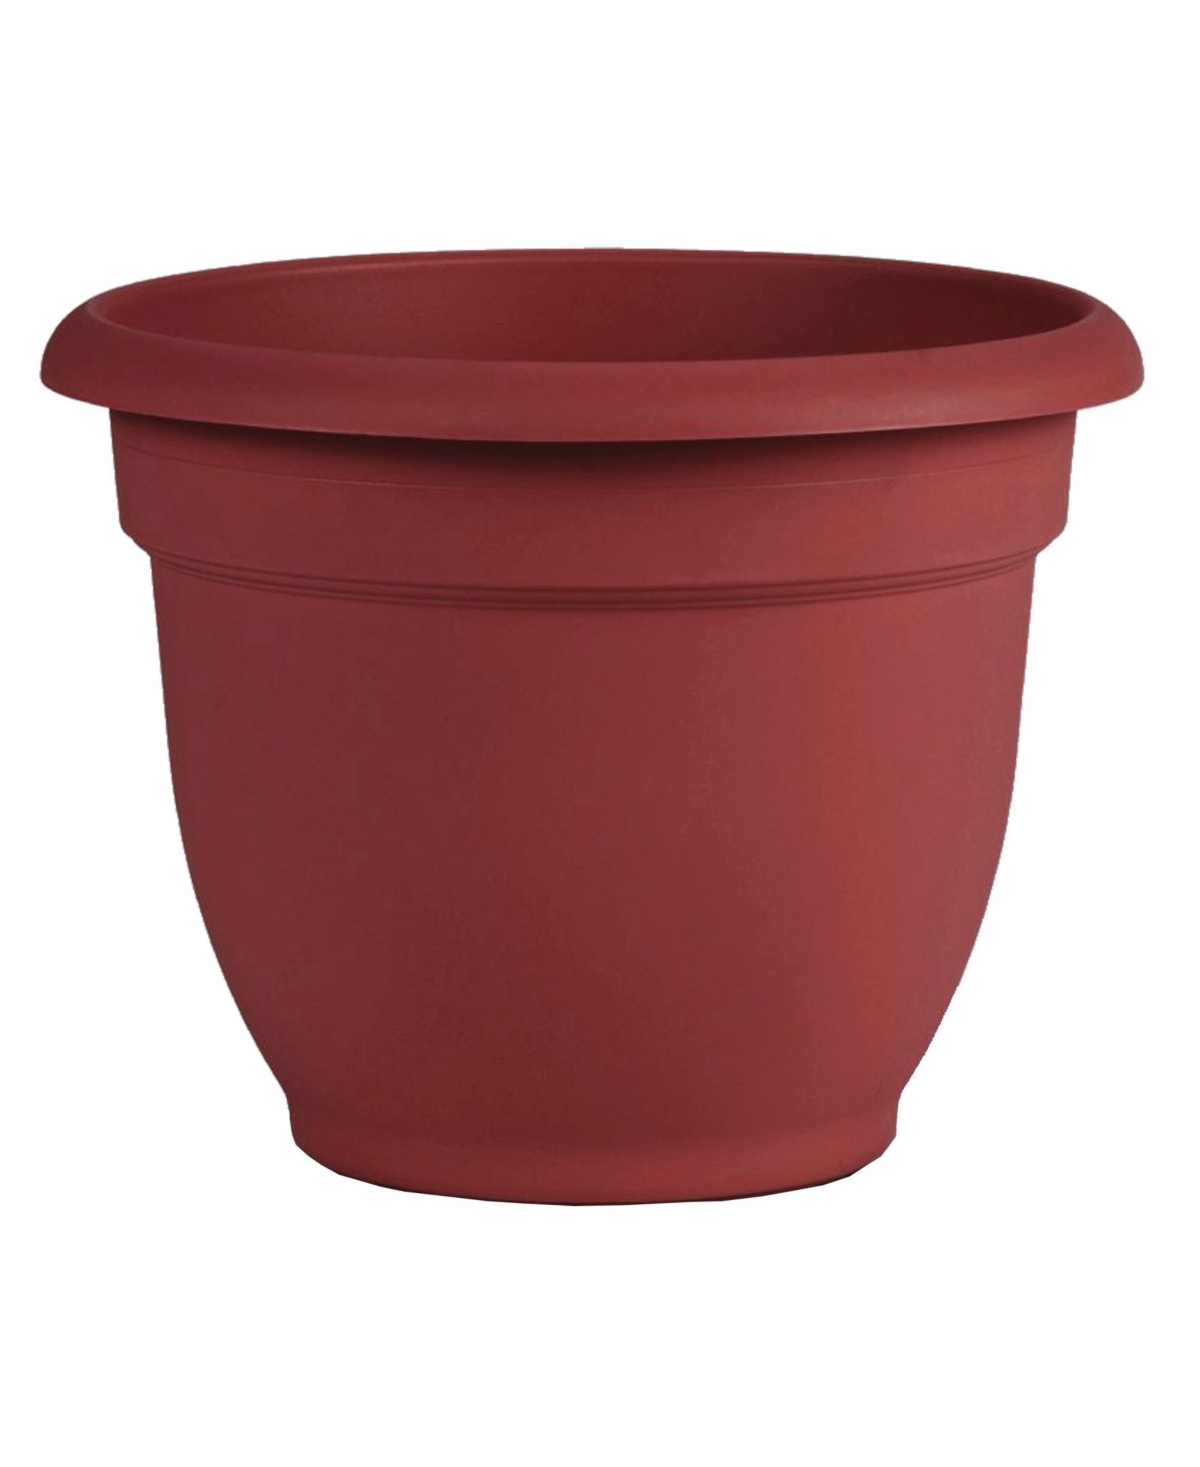 AP1013 Ariana Planter with Self-Watering Disk, Burnt Red - 10 inches - Red